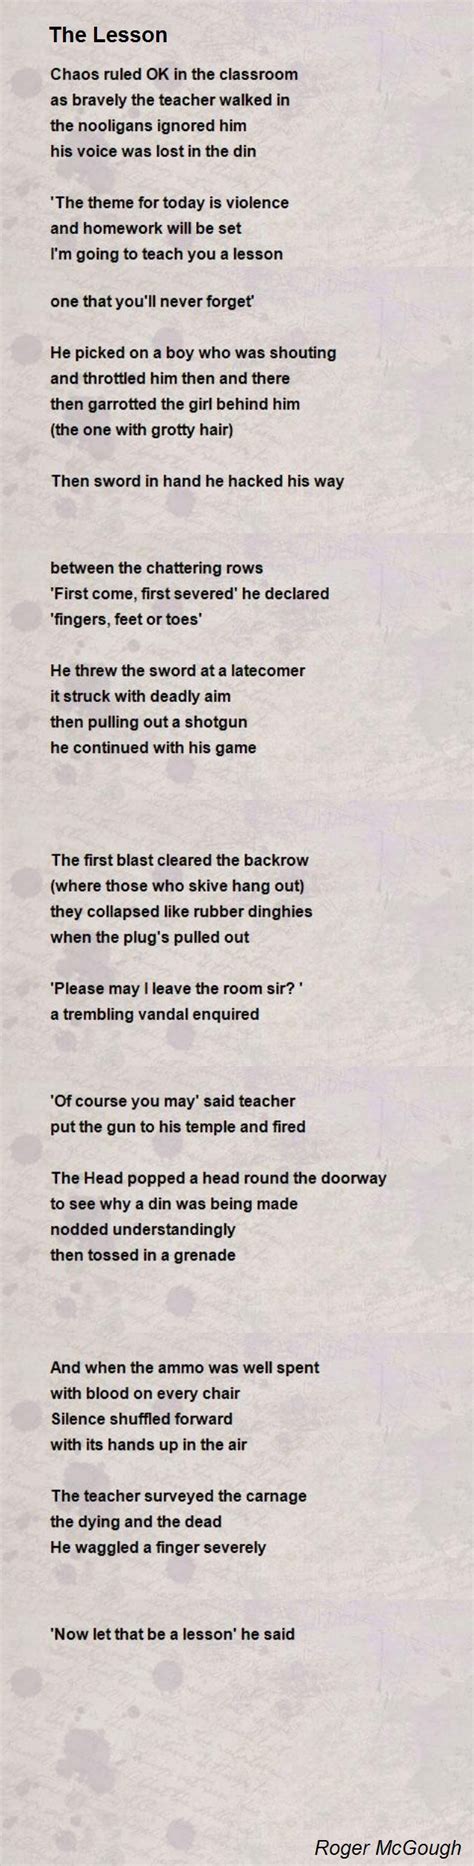 The Lesson The Lesson Poem By Roger Mcgough Lesson Poems Roger